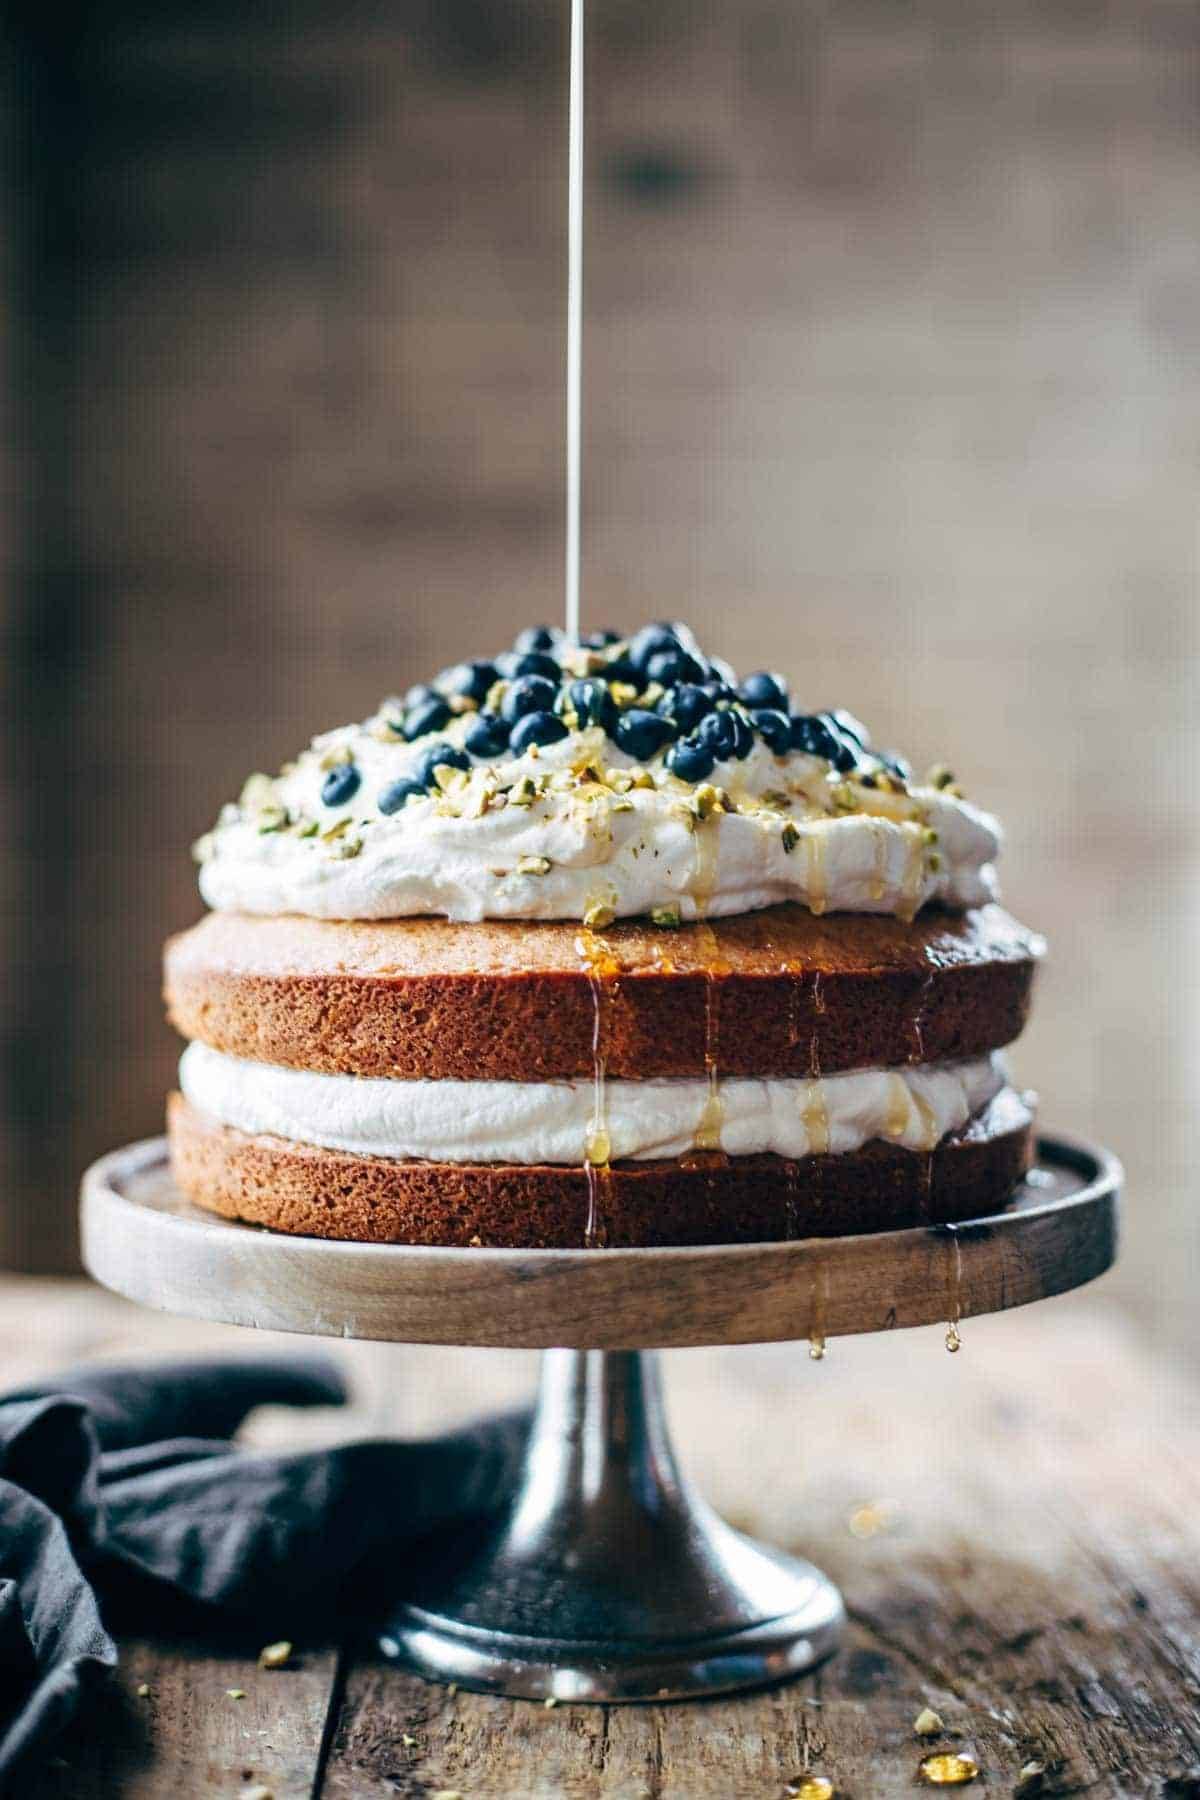 Blueberry orange brunch cake on a cake stand with syrup drizzle.